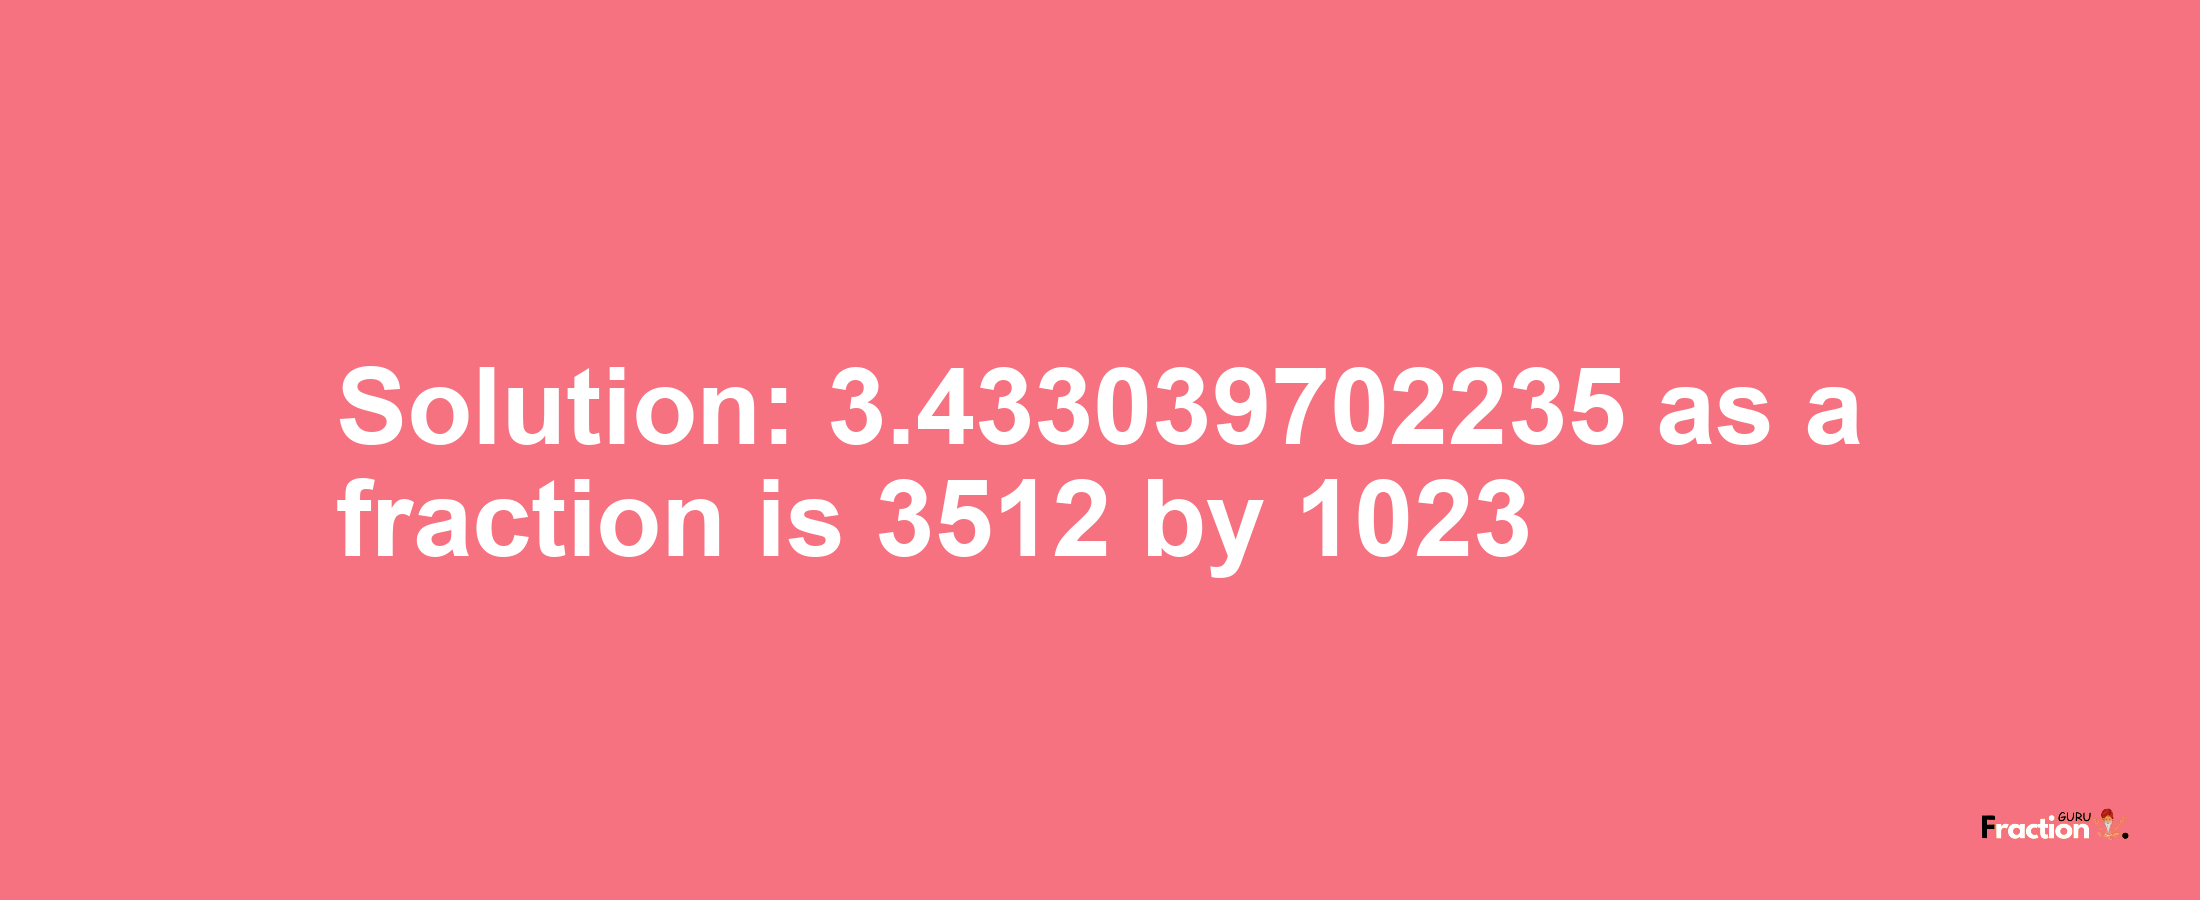 Solution:3.433039702235 as a fraction is 3512/1023